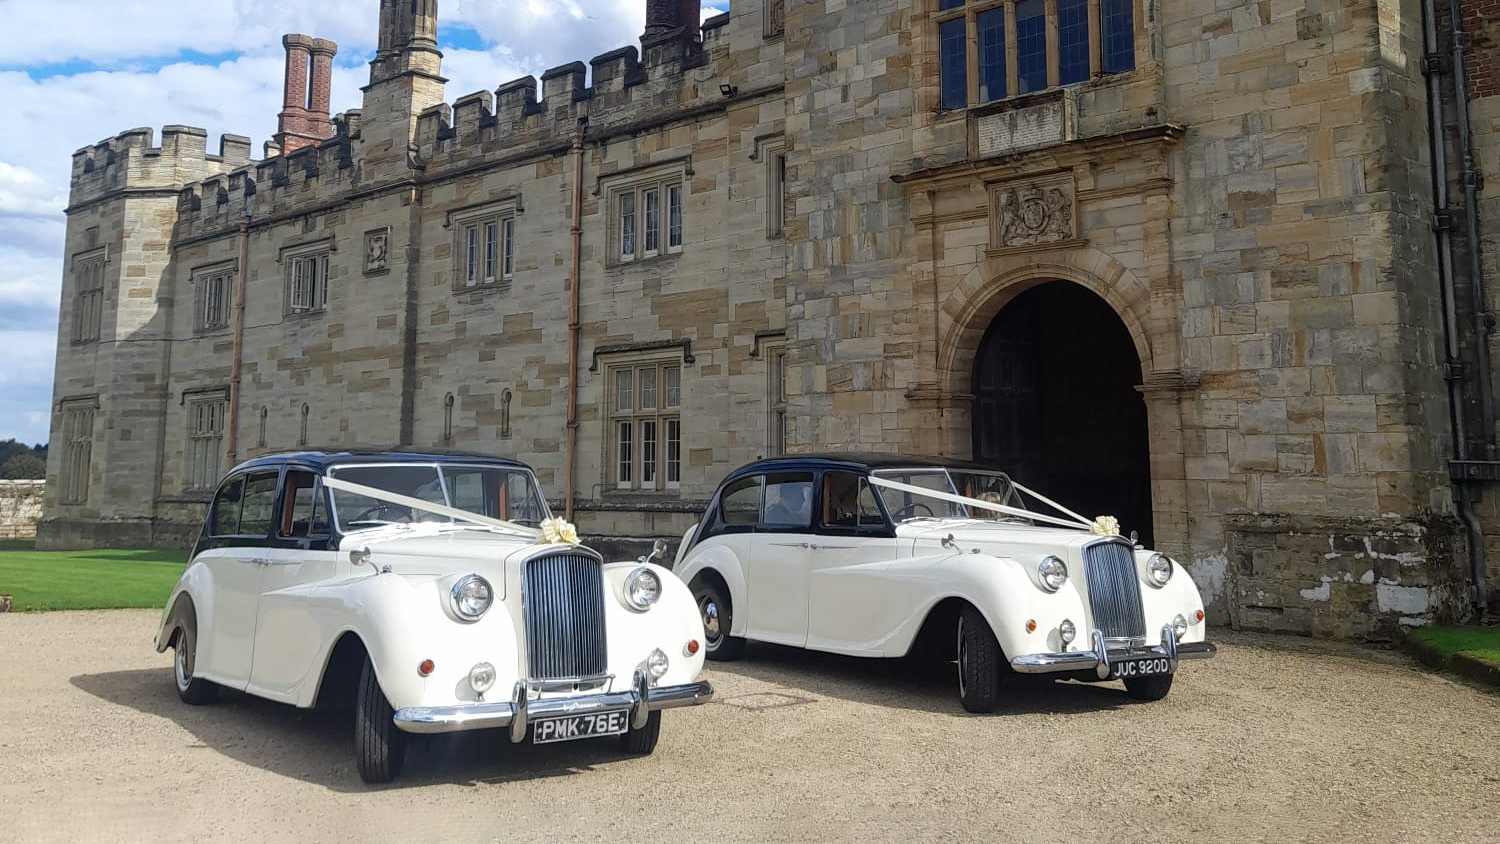 Two Classic Austin Princess Limousine decorated with Ivory Ribbons and Bows on top of the front grill. Vehicles are parked in front of a large manor house in Royal Tunbridge Wells